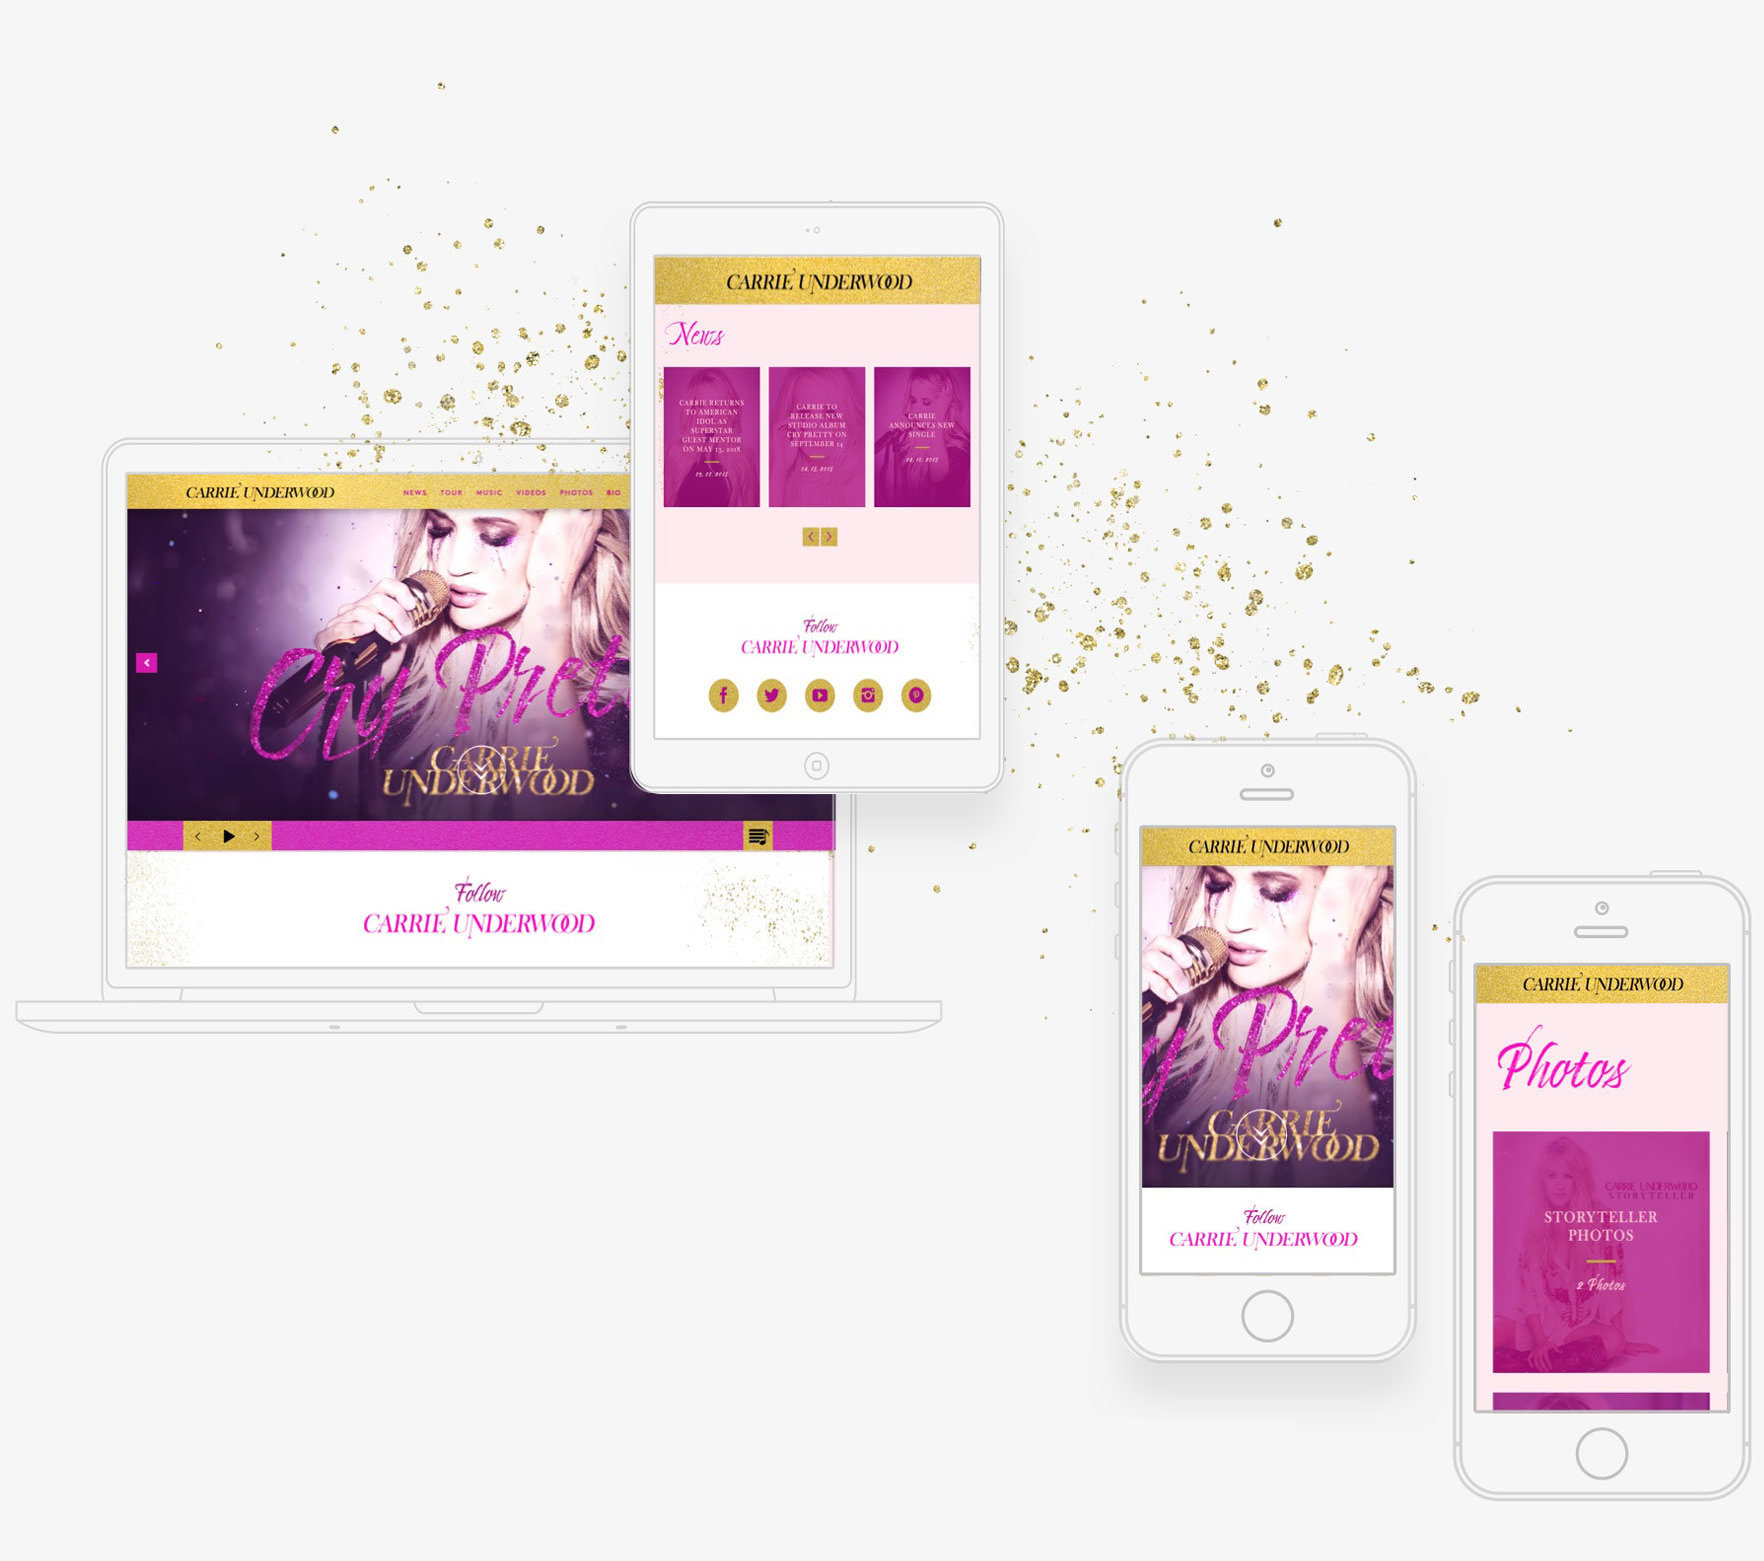 Carrie Underwood Cry Pretty Album Website Design by ST8MNT